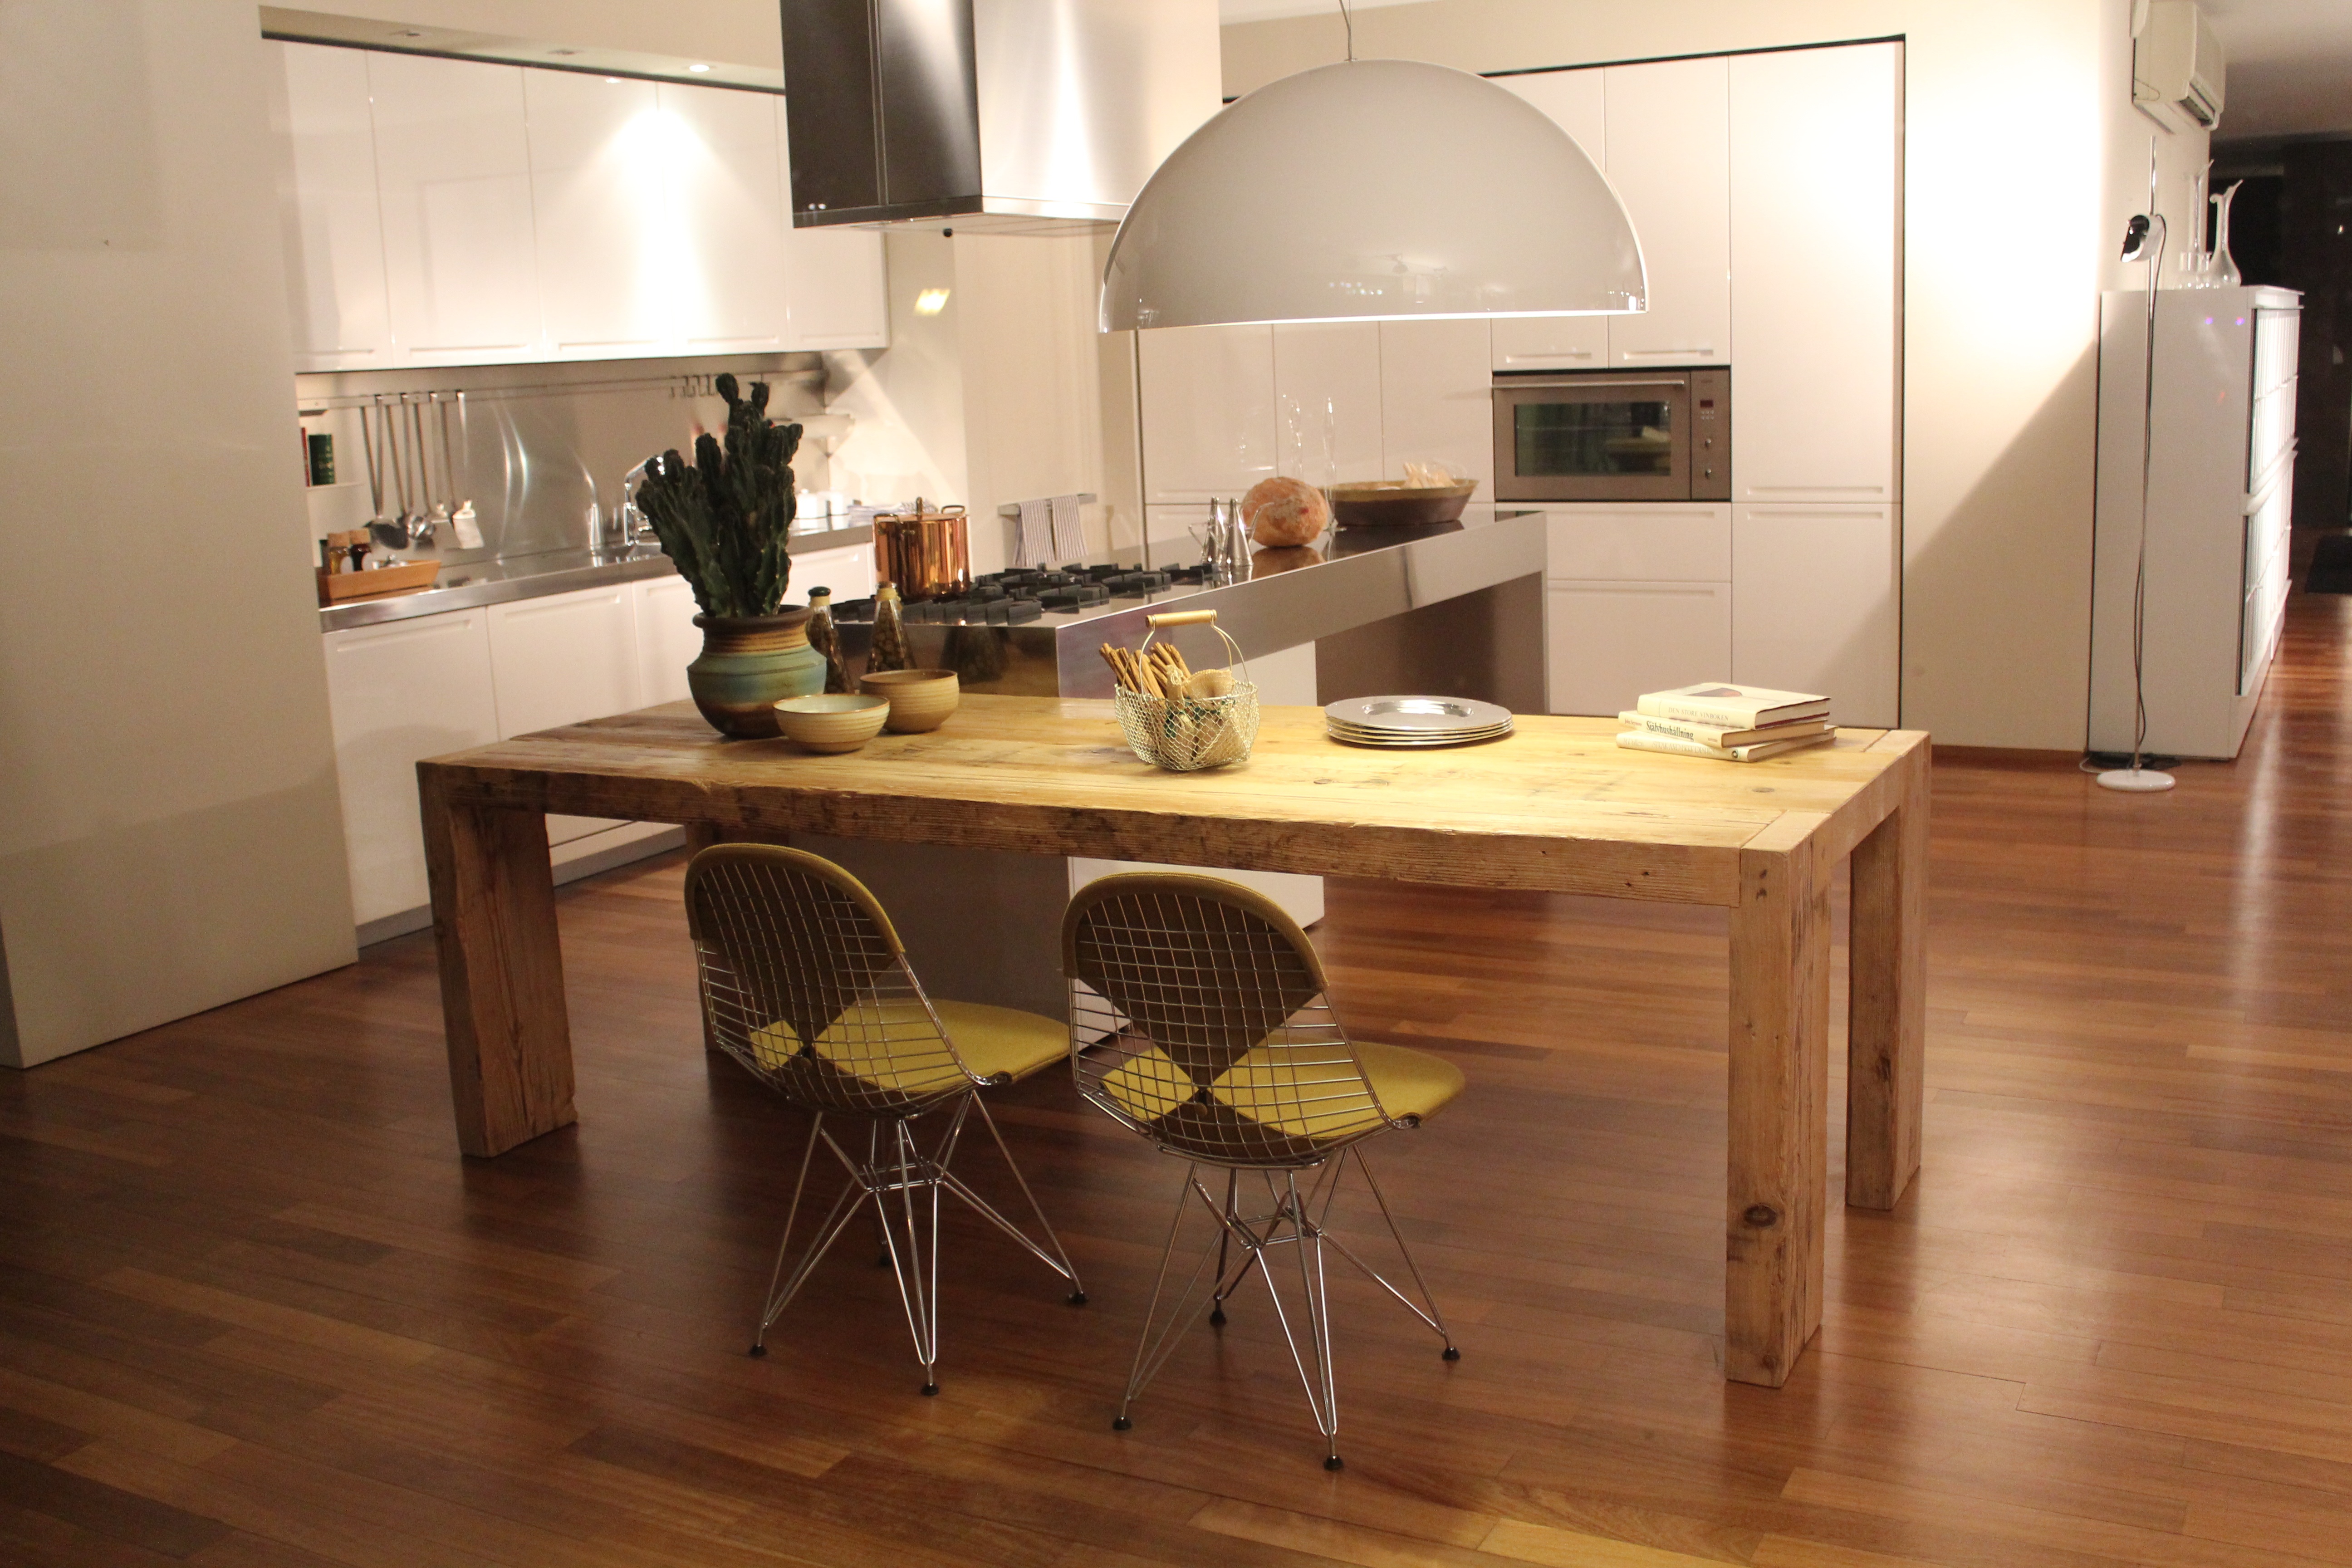 Free photo Interior of a kitchen with a wooden table